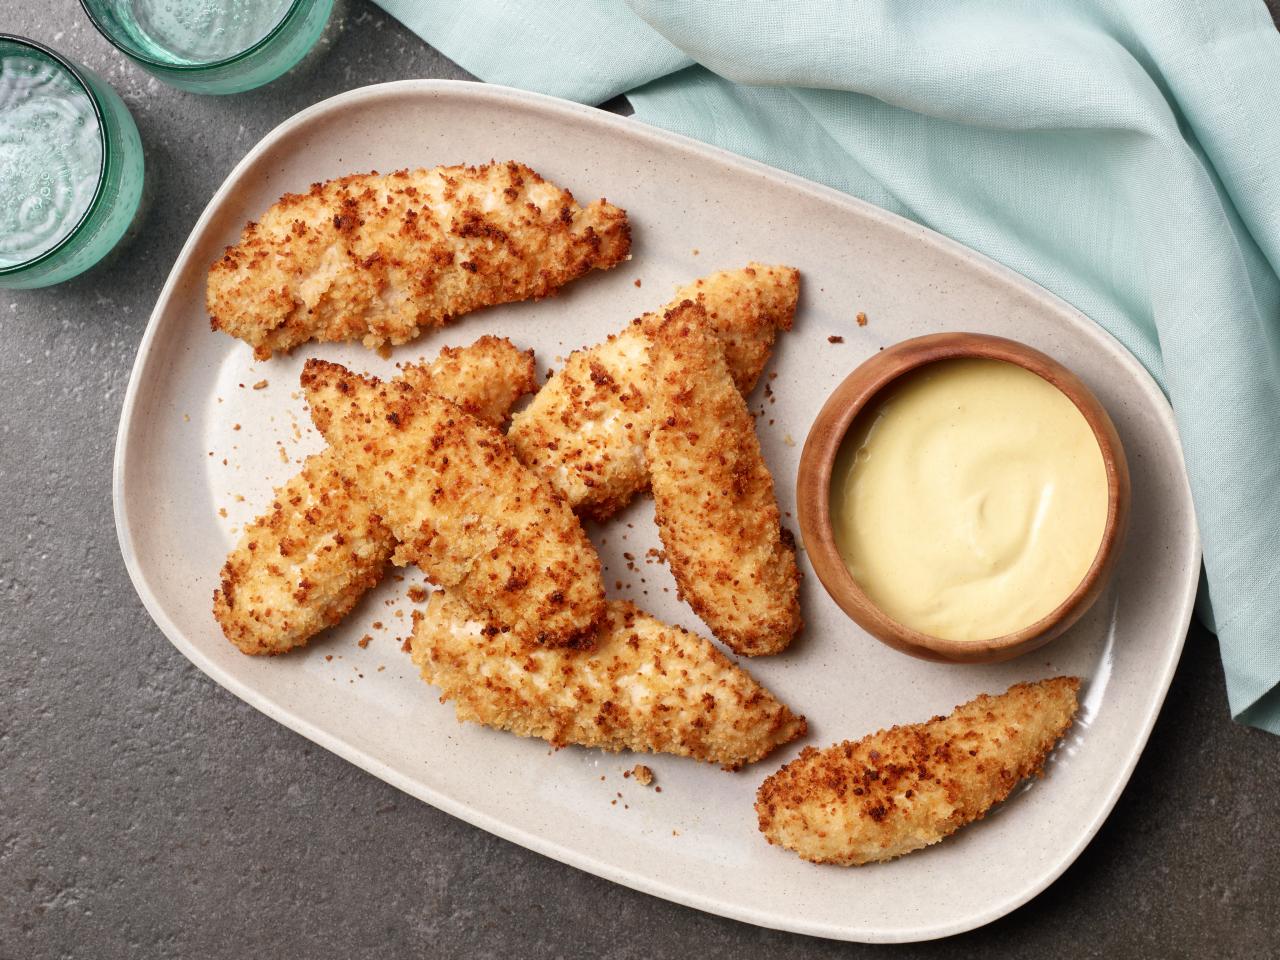 Chicken tenders for the win!